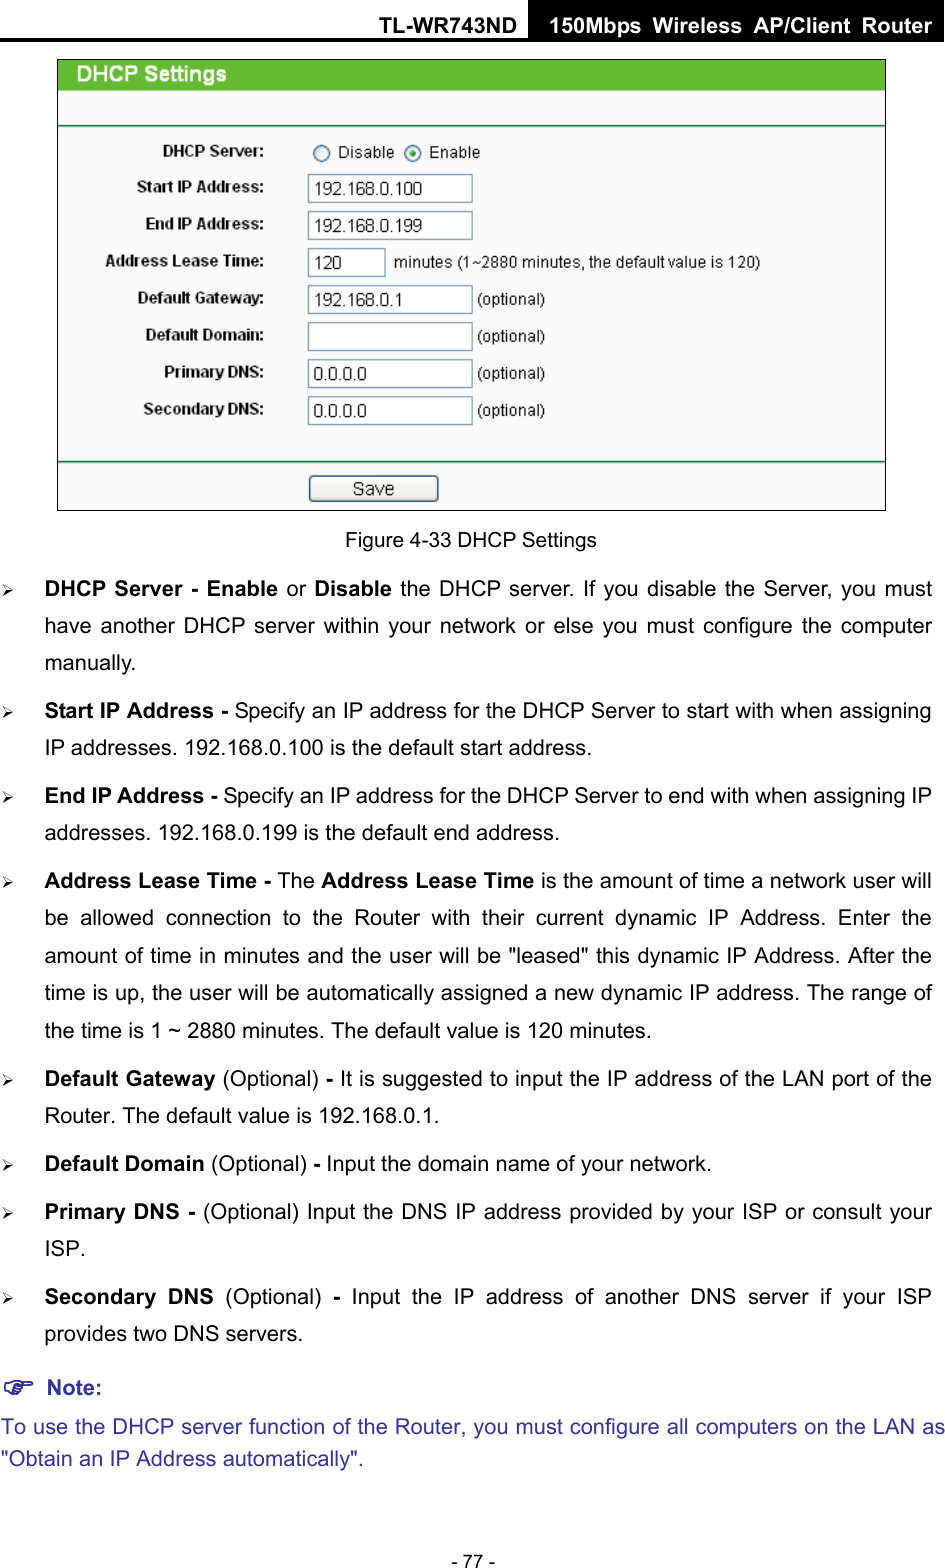 TL-WR743ND 150Mbps Wireless AP/Client Router - 77 -  Figure 4-33 DHCP Settings  DHCP Server - Enable or Disable the DHCP server. If you disable the Server, you must have another DHCP server within your network or else you must configure the computer manually.  Start IP Address - Specify an IP address for the DHCP Server to start with when assigning IP addresses. 192.168.0.100 is the default start address.  End IP Address - Specify an IP address for the DHCP Server to end with when assigning IP addresses. 192.168.0.199 is the default end address.  Address Lease Time - The Address Lease Time is the amount of time a network user will be allowed connection to the Router with their current dynamic IP Address. Enter the amount of time in minutes and the user will be &quot;leased&quot; this dynamic IP Address. After the time is up, the user will be automatically assigned a new dynamic IP address. The range of the time is 1 ~ 2880 minutes. The default value is 120 minutes.  Default Gateway (Optional) - It is suggested to input the IP address of the LAN port of the Router. The default value is 192.168.0.1.  Default Domain (Optional) - Input the domain name of your network.  Primary DNS - (Optional) Input the DNS IP address provided by your ISP or consult your ISP.  Secondary DNS (Optional)  -  Input the IP address of another DNS server if your ISP provides two DNS servers.  Note: To use the DHCP server function of the Router, you must configure all computers on the LAN as &quot;Obtain an IP Address automatically&quot;. 